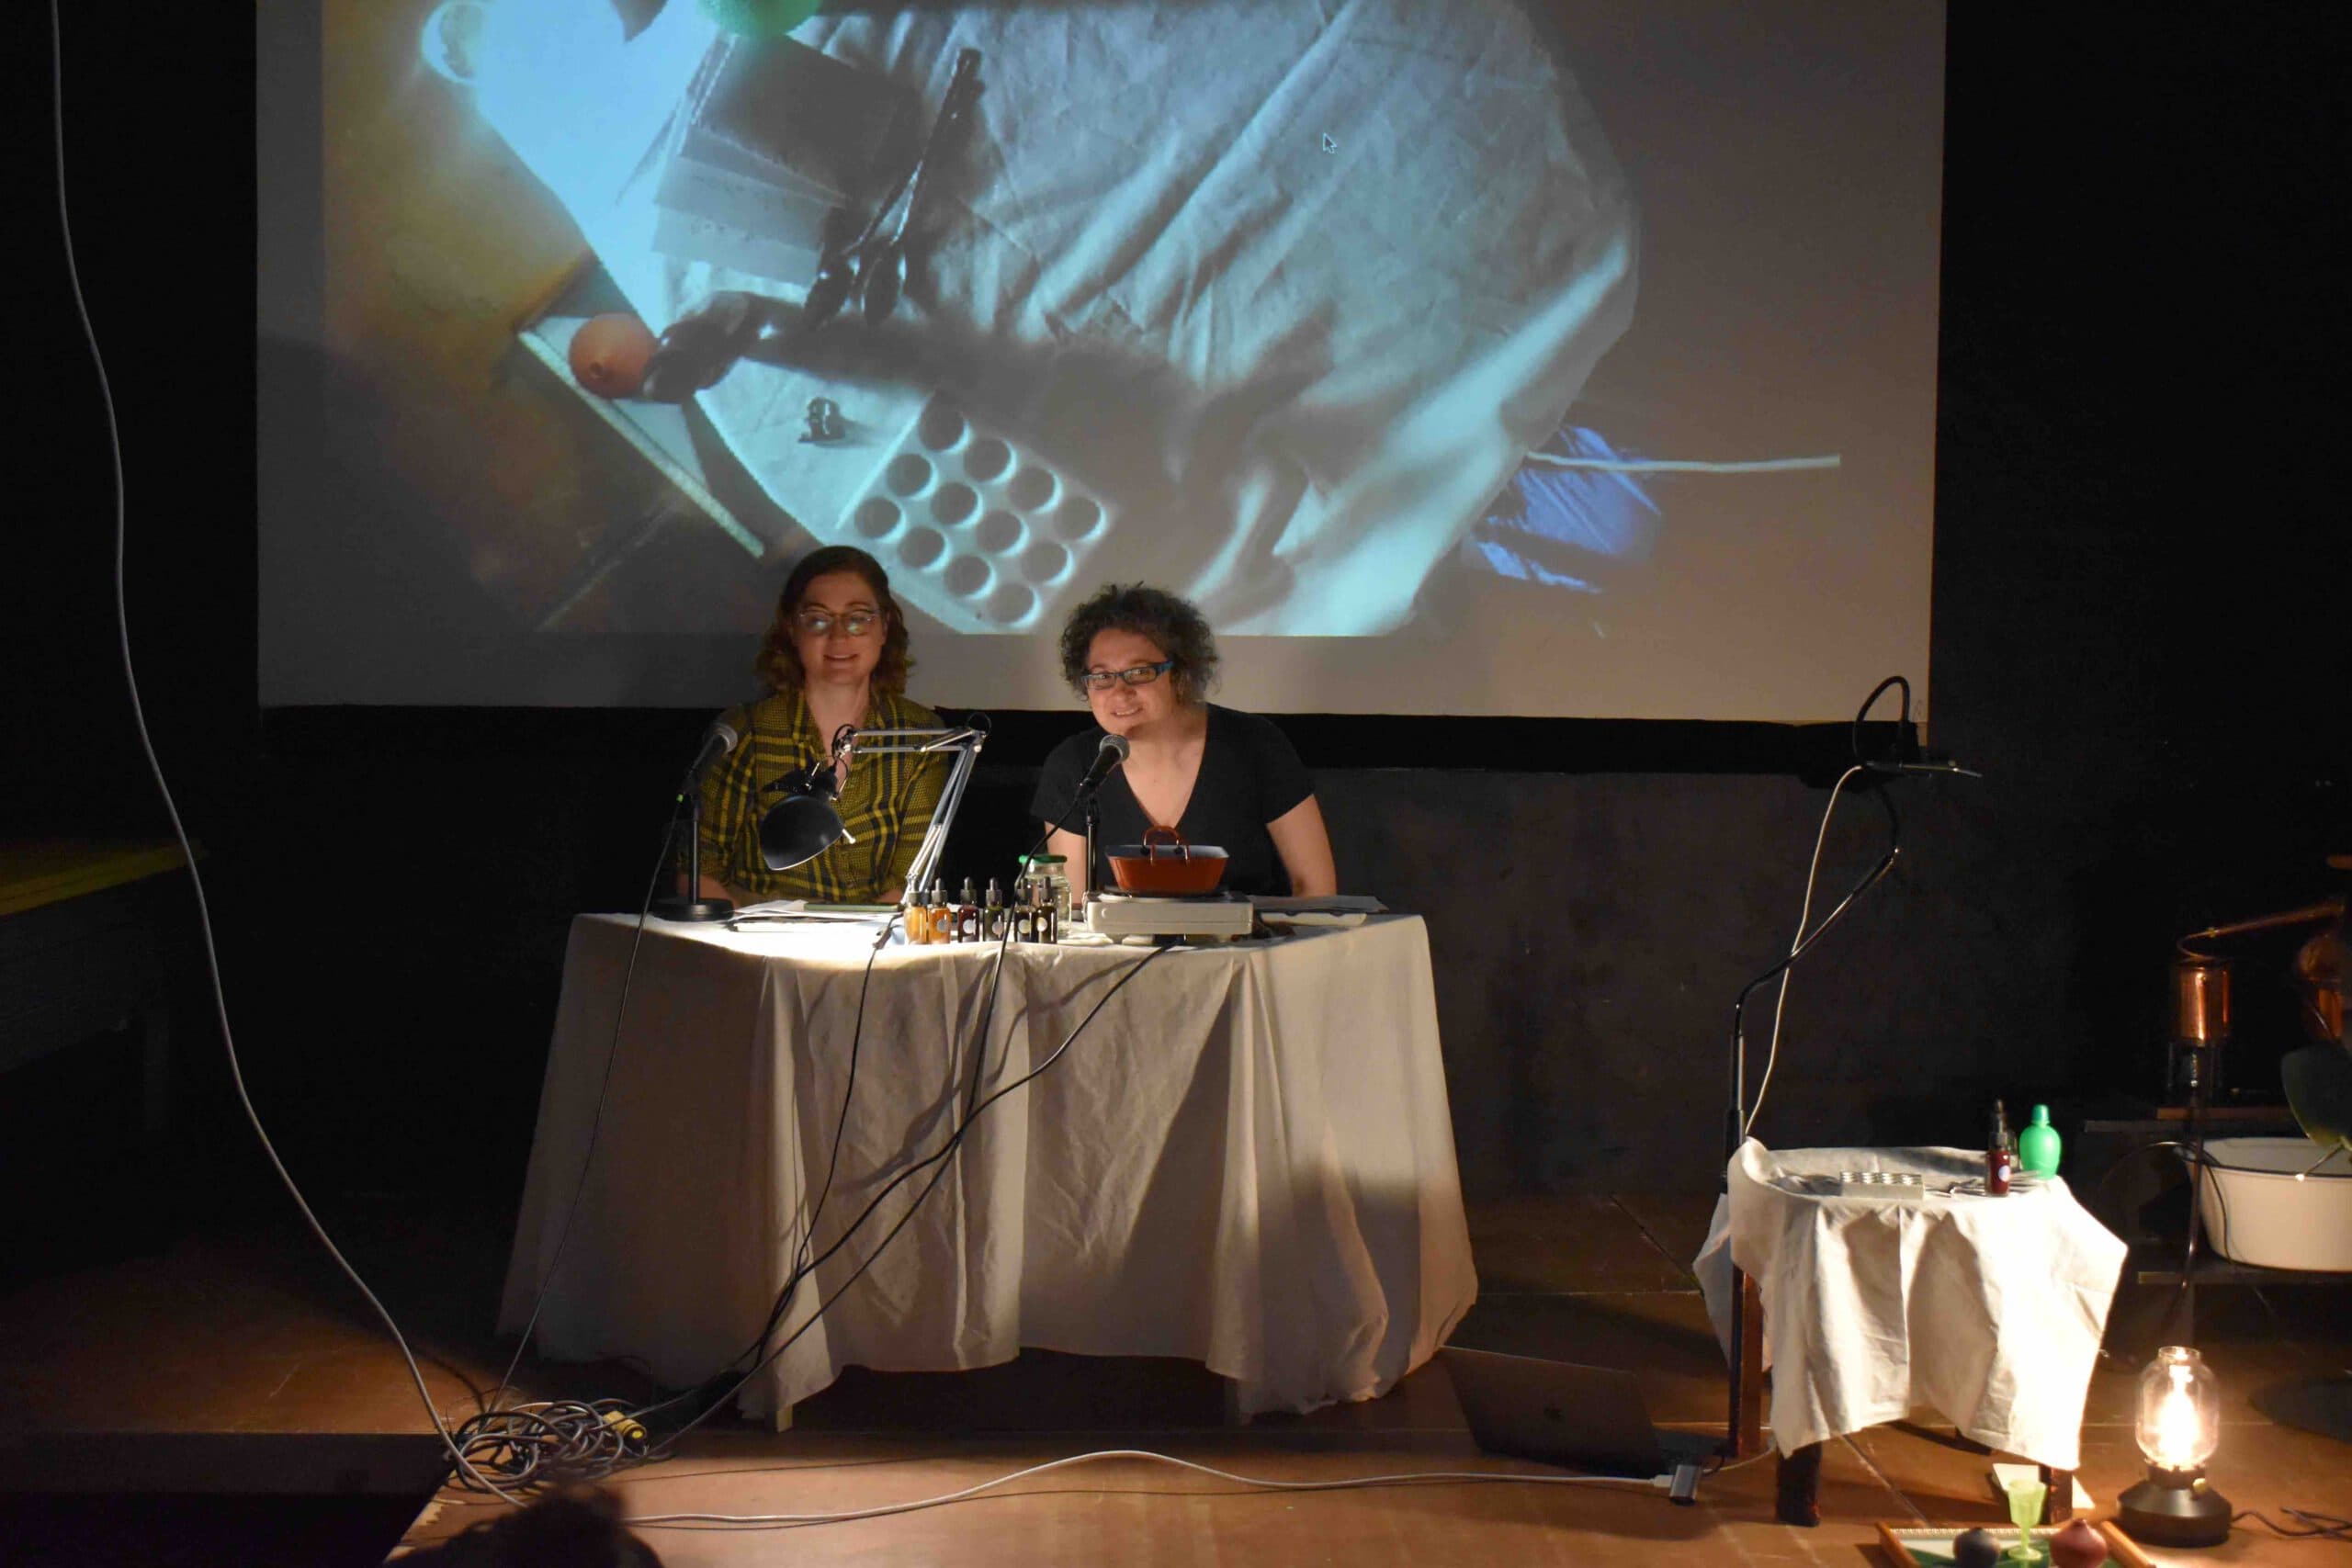 two women seated at a table. a projection in the background